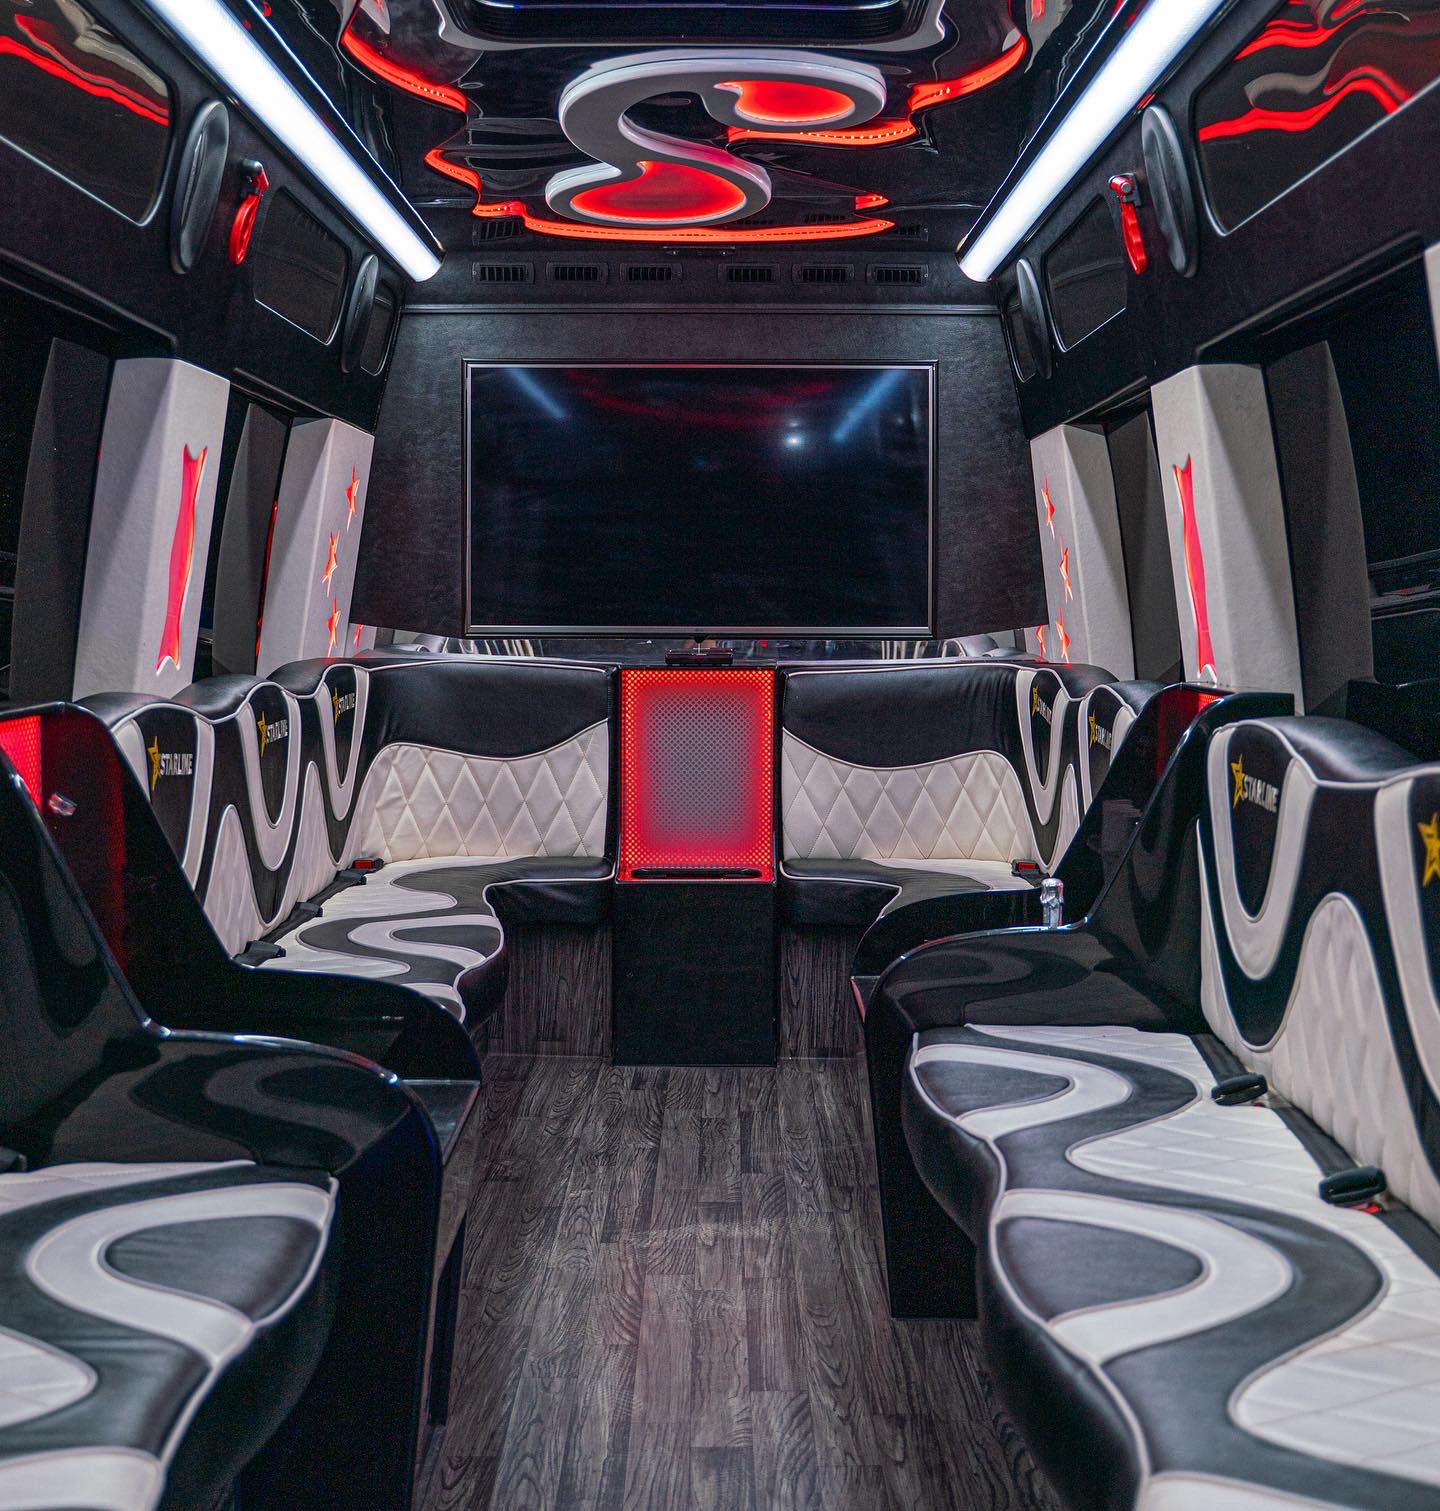 Rent Party Bus in London, Essex, Hertfordshire - VIP Party Buses